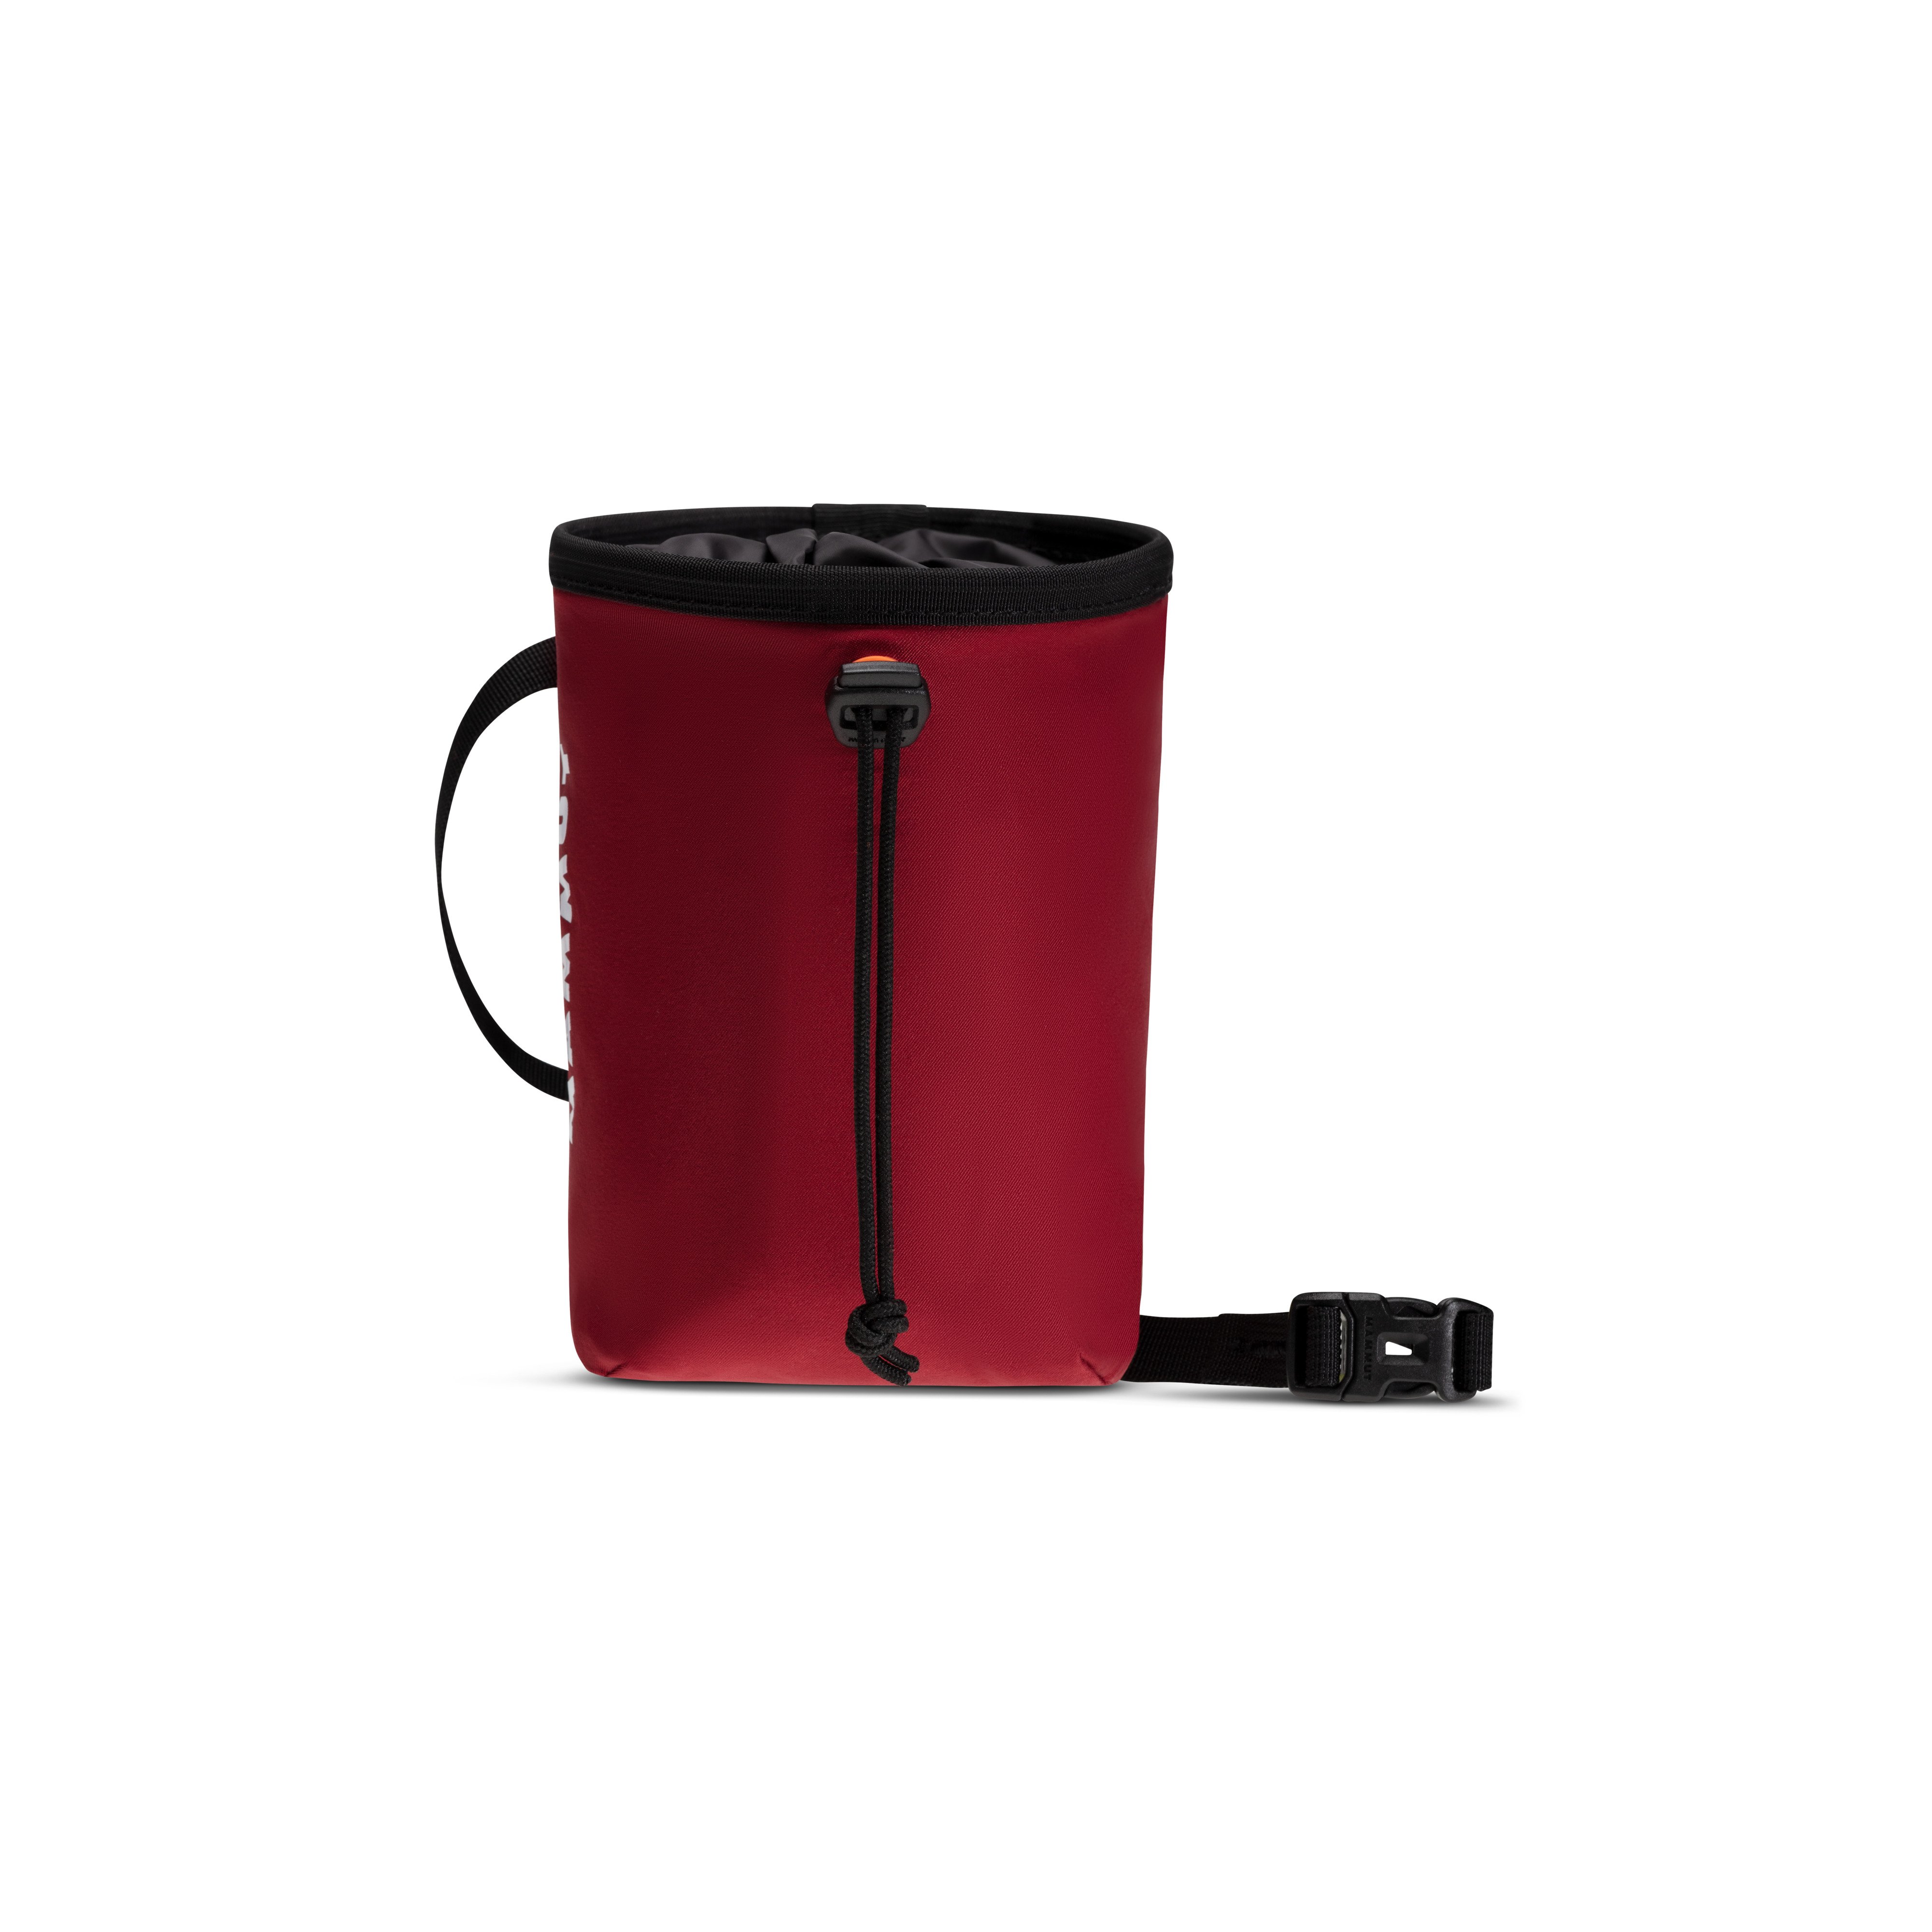 Crag Chalk Bag - blood red, one size product image